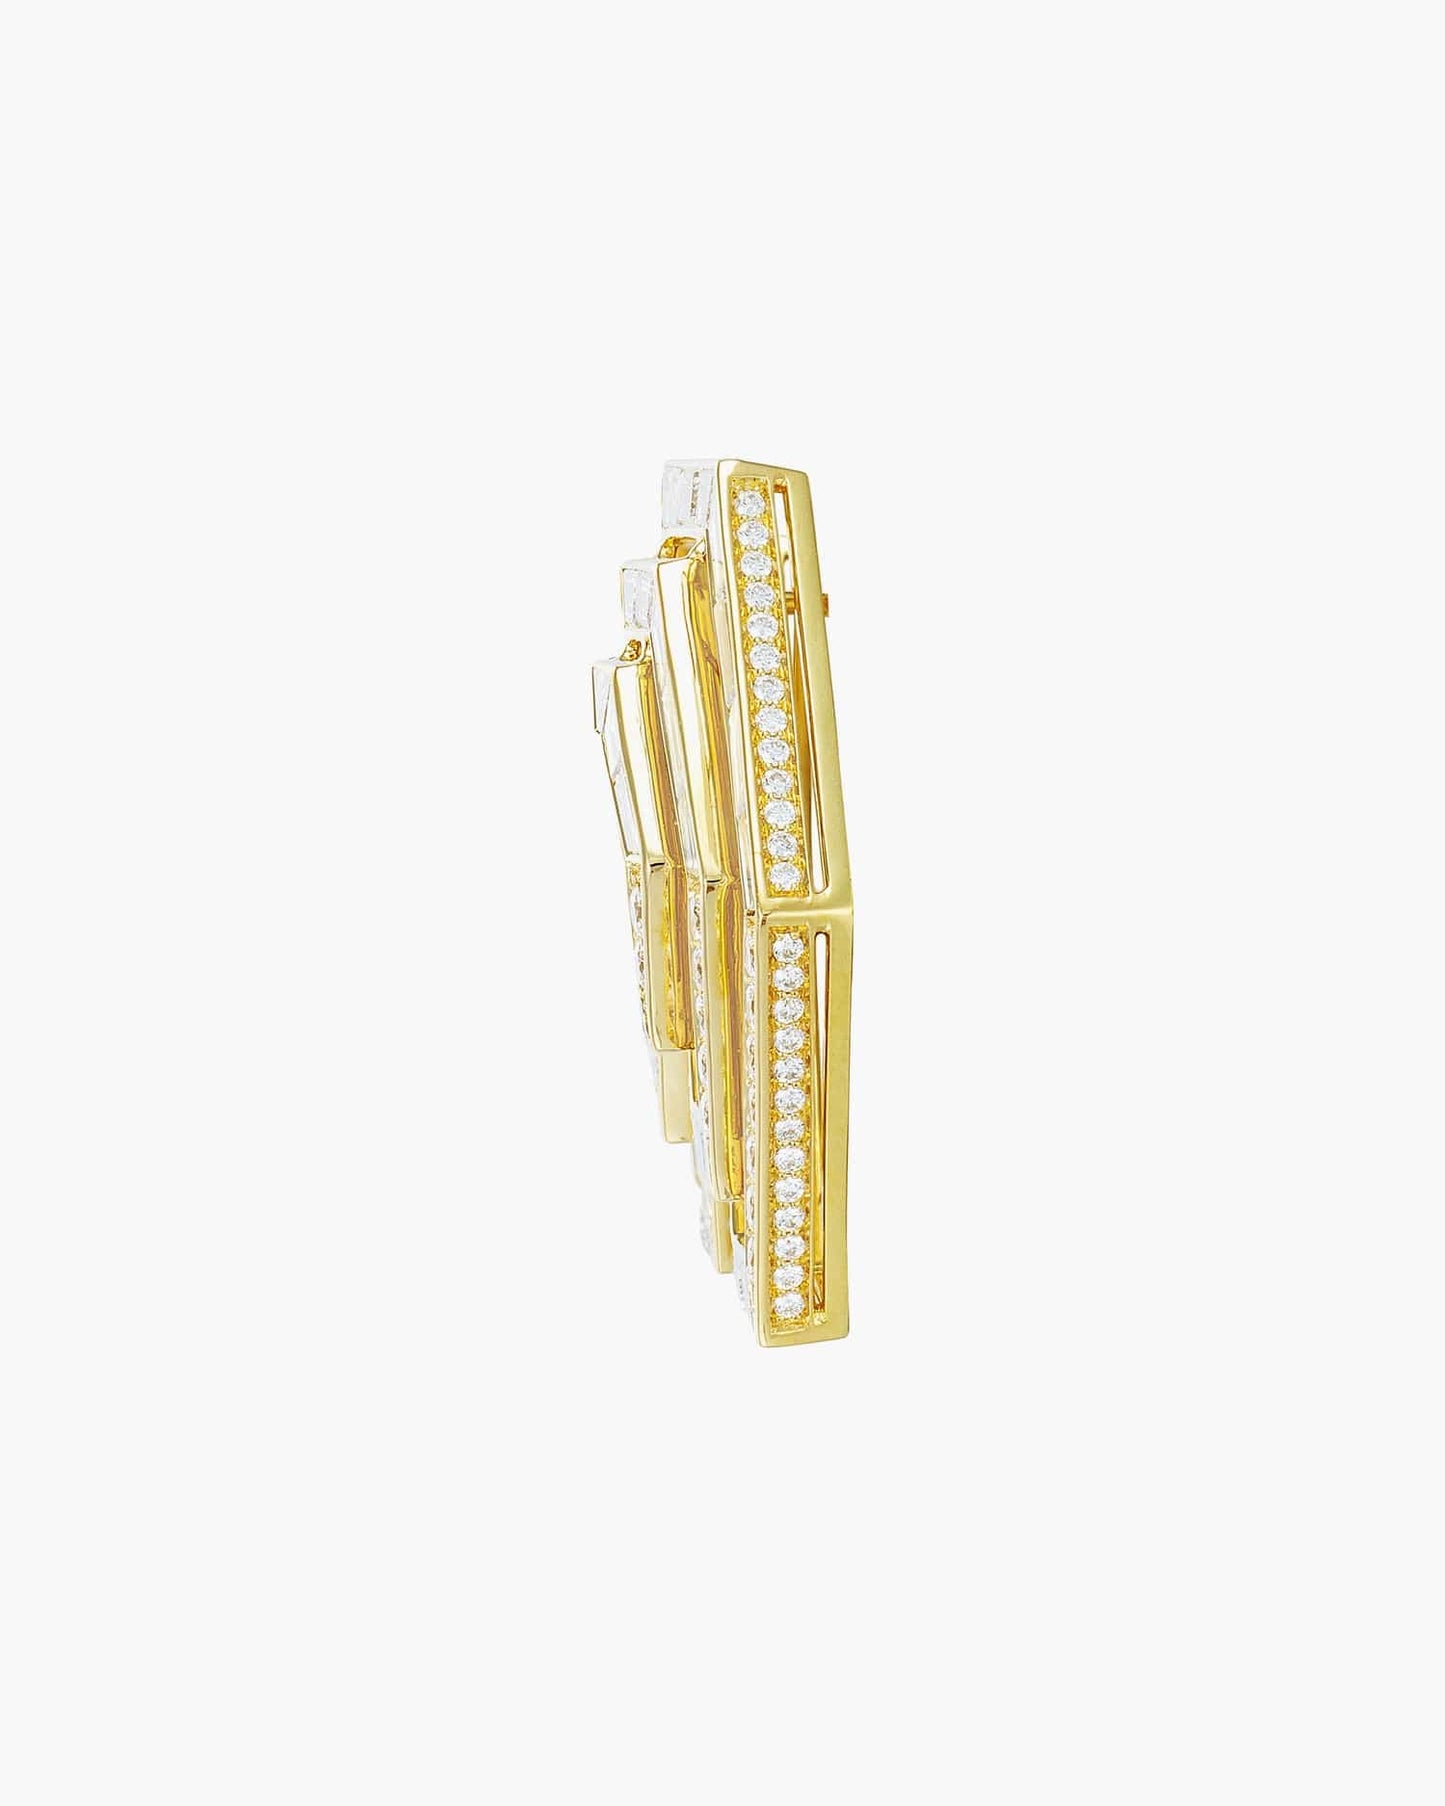 Diamond Concentrica Earrings in Yellow Gold